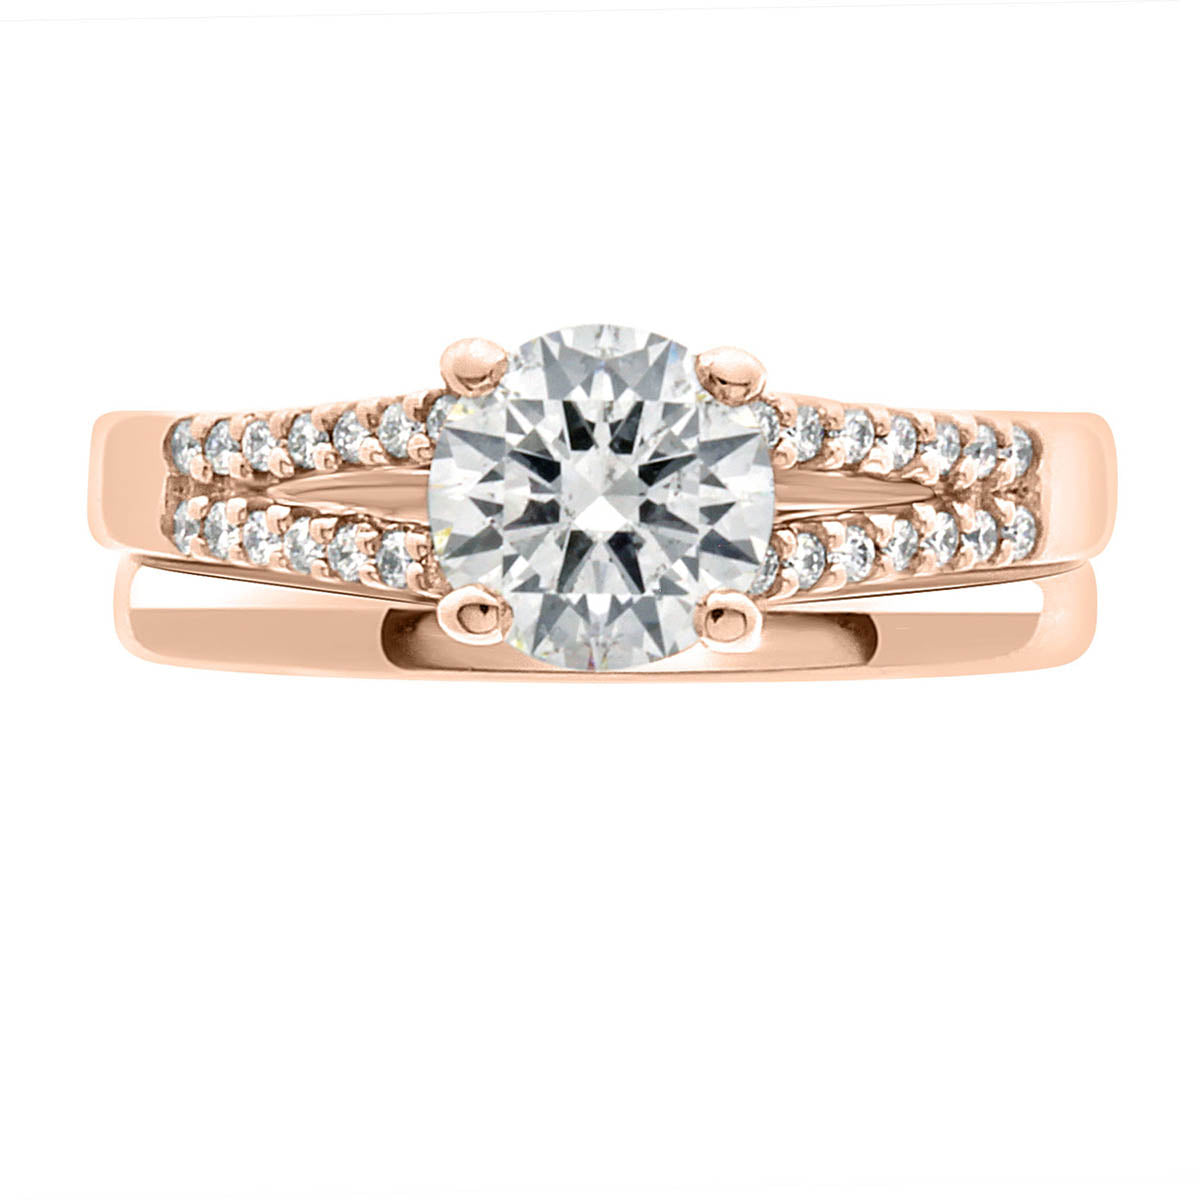 Round Diamond With Split Band made from rose gold with a plain wedding ring